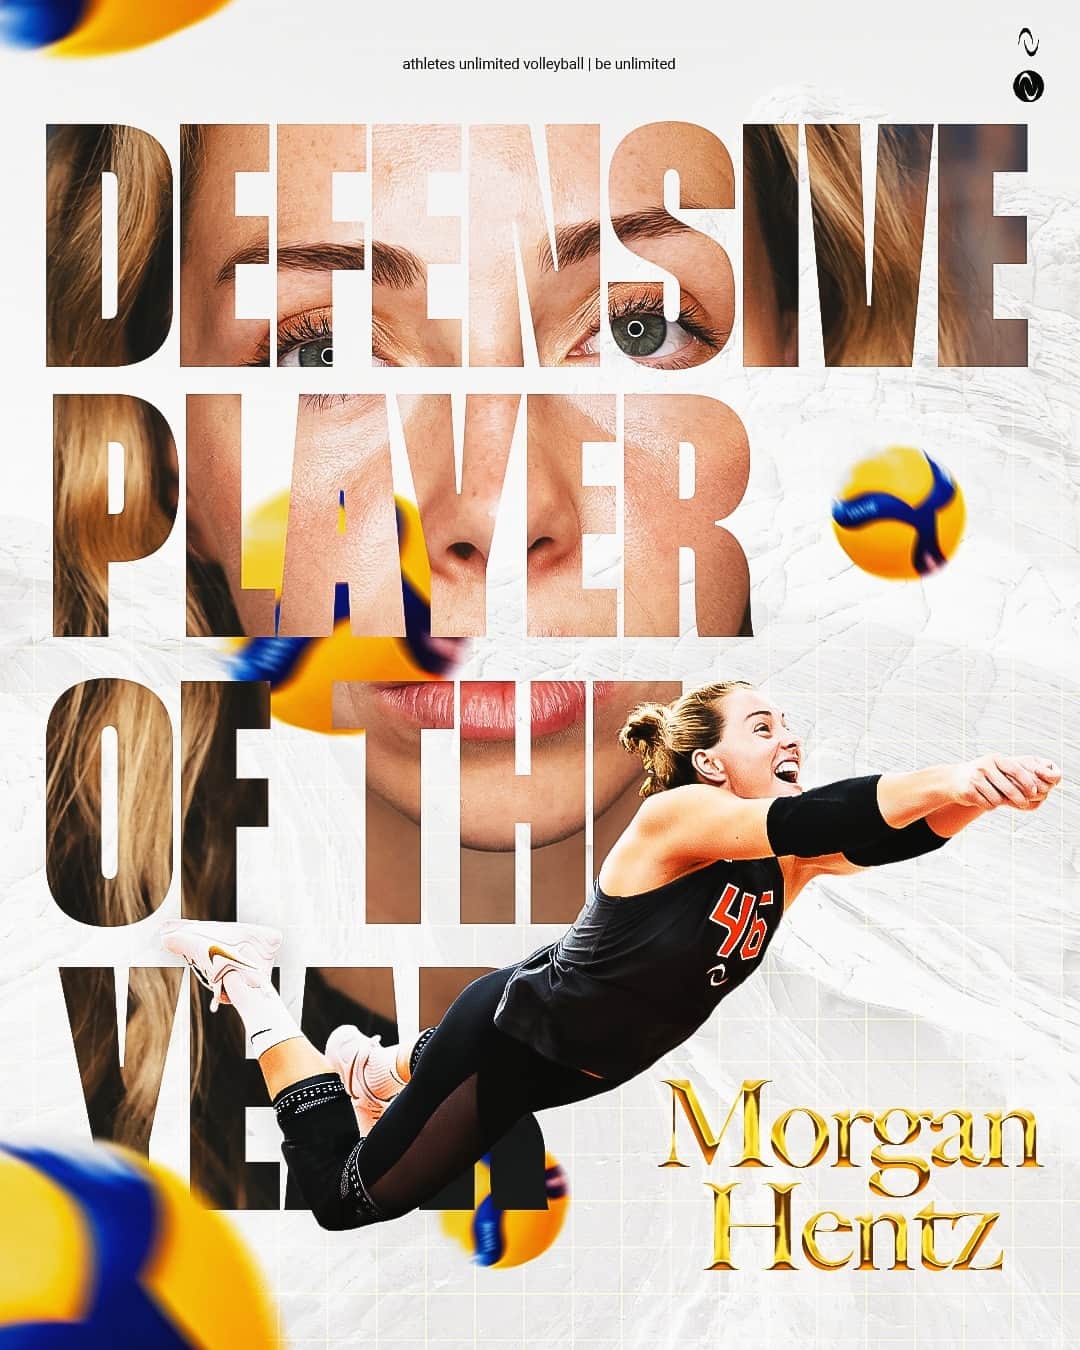 USA Volleyballのインスタグラム：「Congratulations to all the Athletes Unlimited end of season award winners including @leahedmond13 (Champion), @morganhentz (Defensive Player of the Year), and @mollymccage (Middle Blocker of the Year)!  Check out @auprovolleyball for more info and see all the winners. #AUVB」